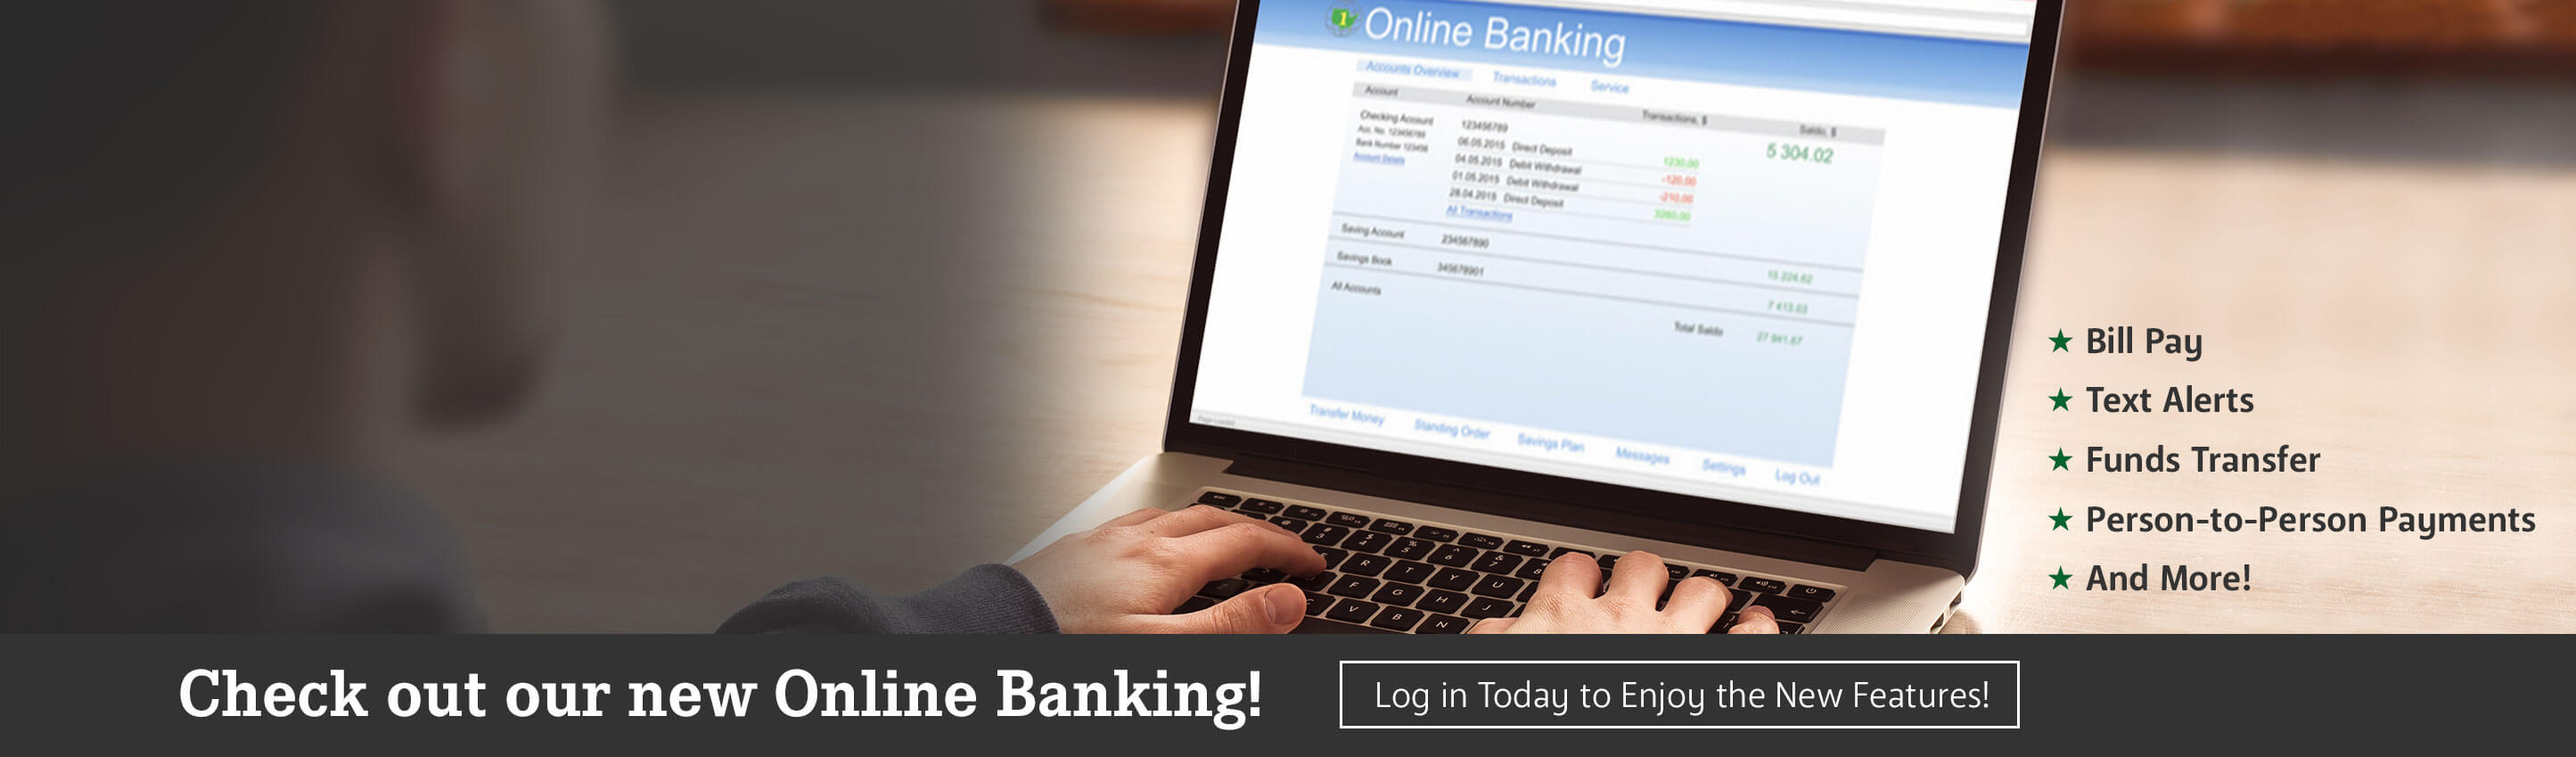 Check out our new Online Banking! Log in Today to Enjoy the New Features!